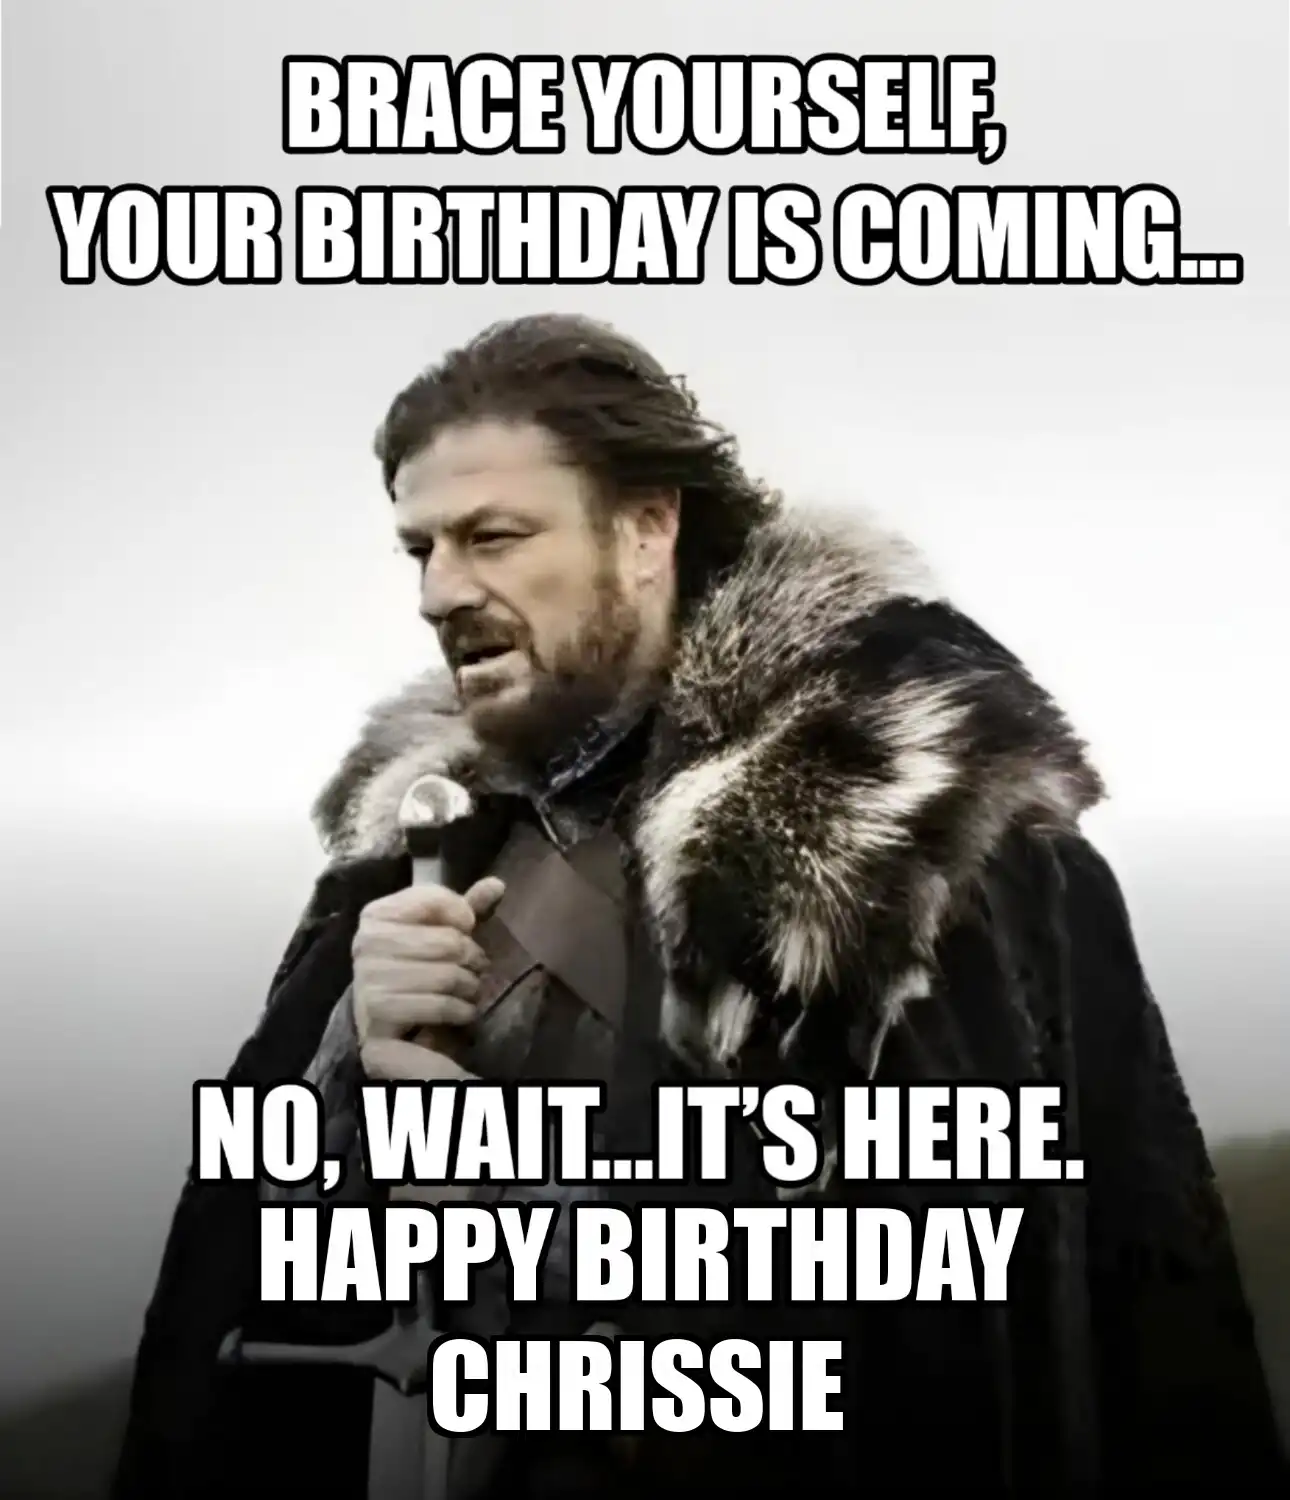 Happy Birthday Chrissie Brace Yourself Your Birthday Is Coming Meme